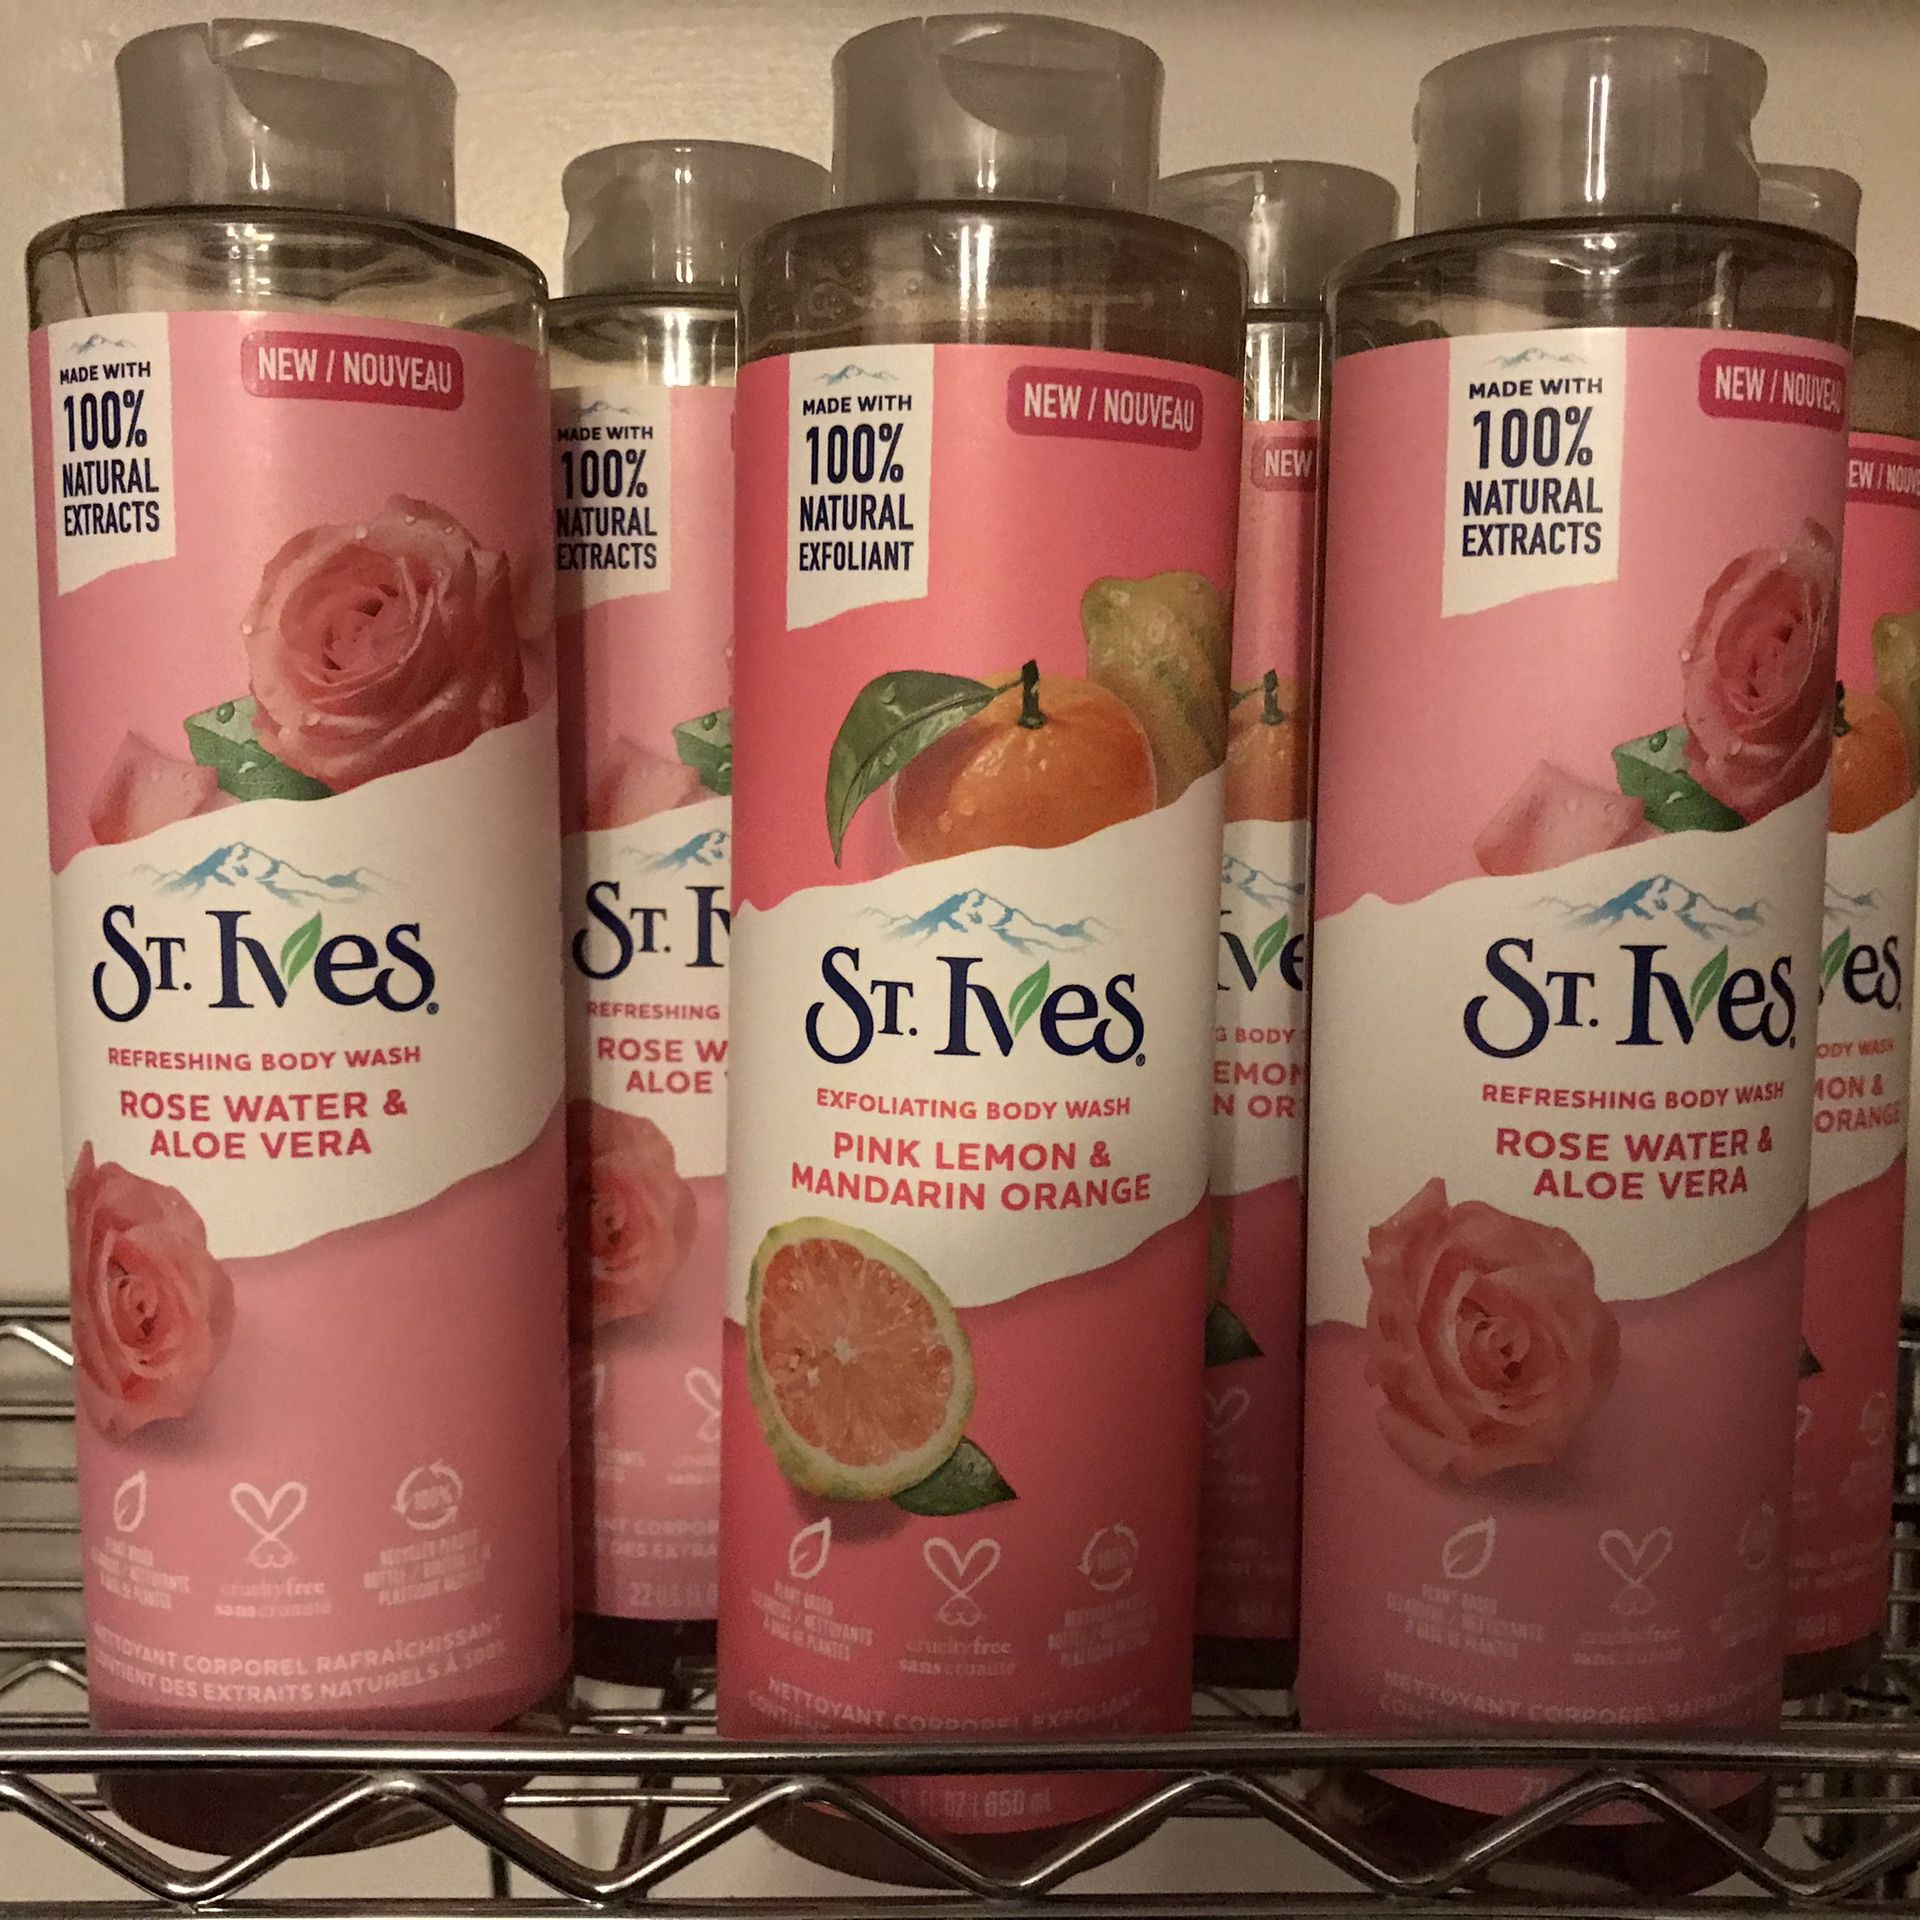 Women’s Body Wash - St. Ives and Caress